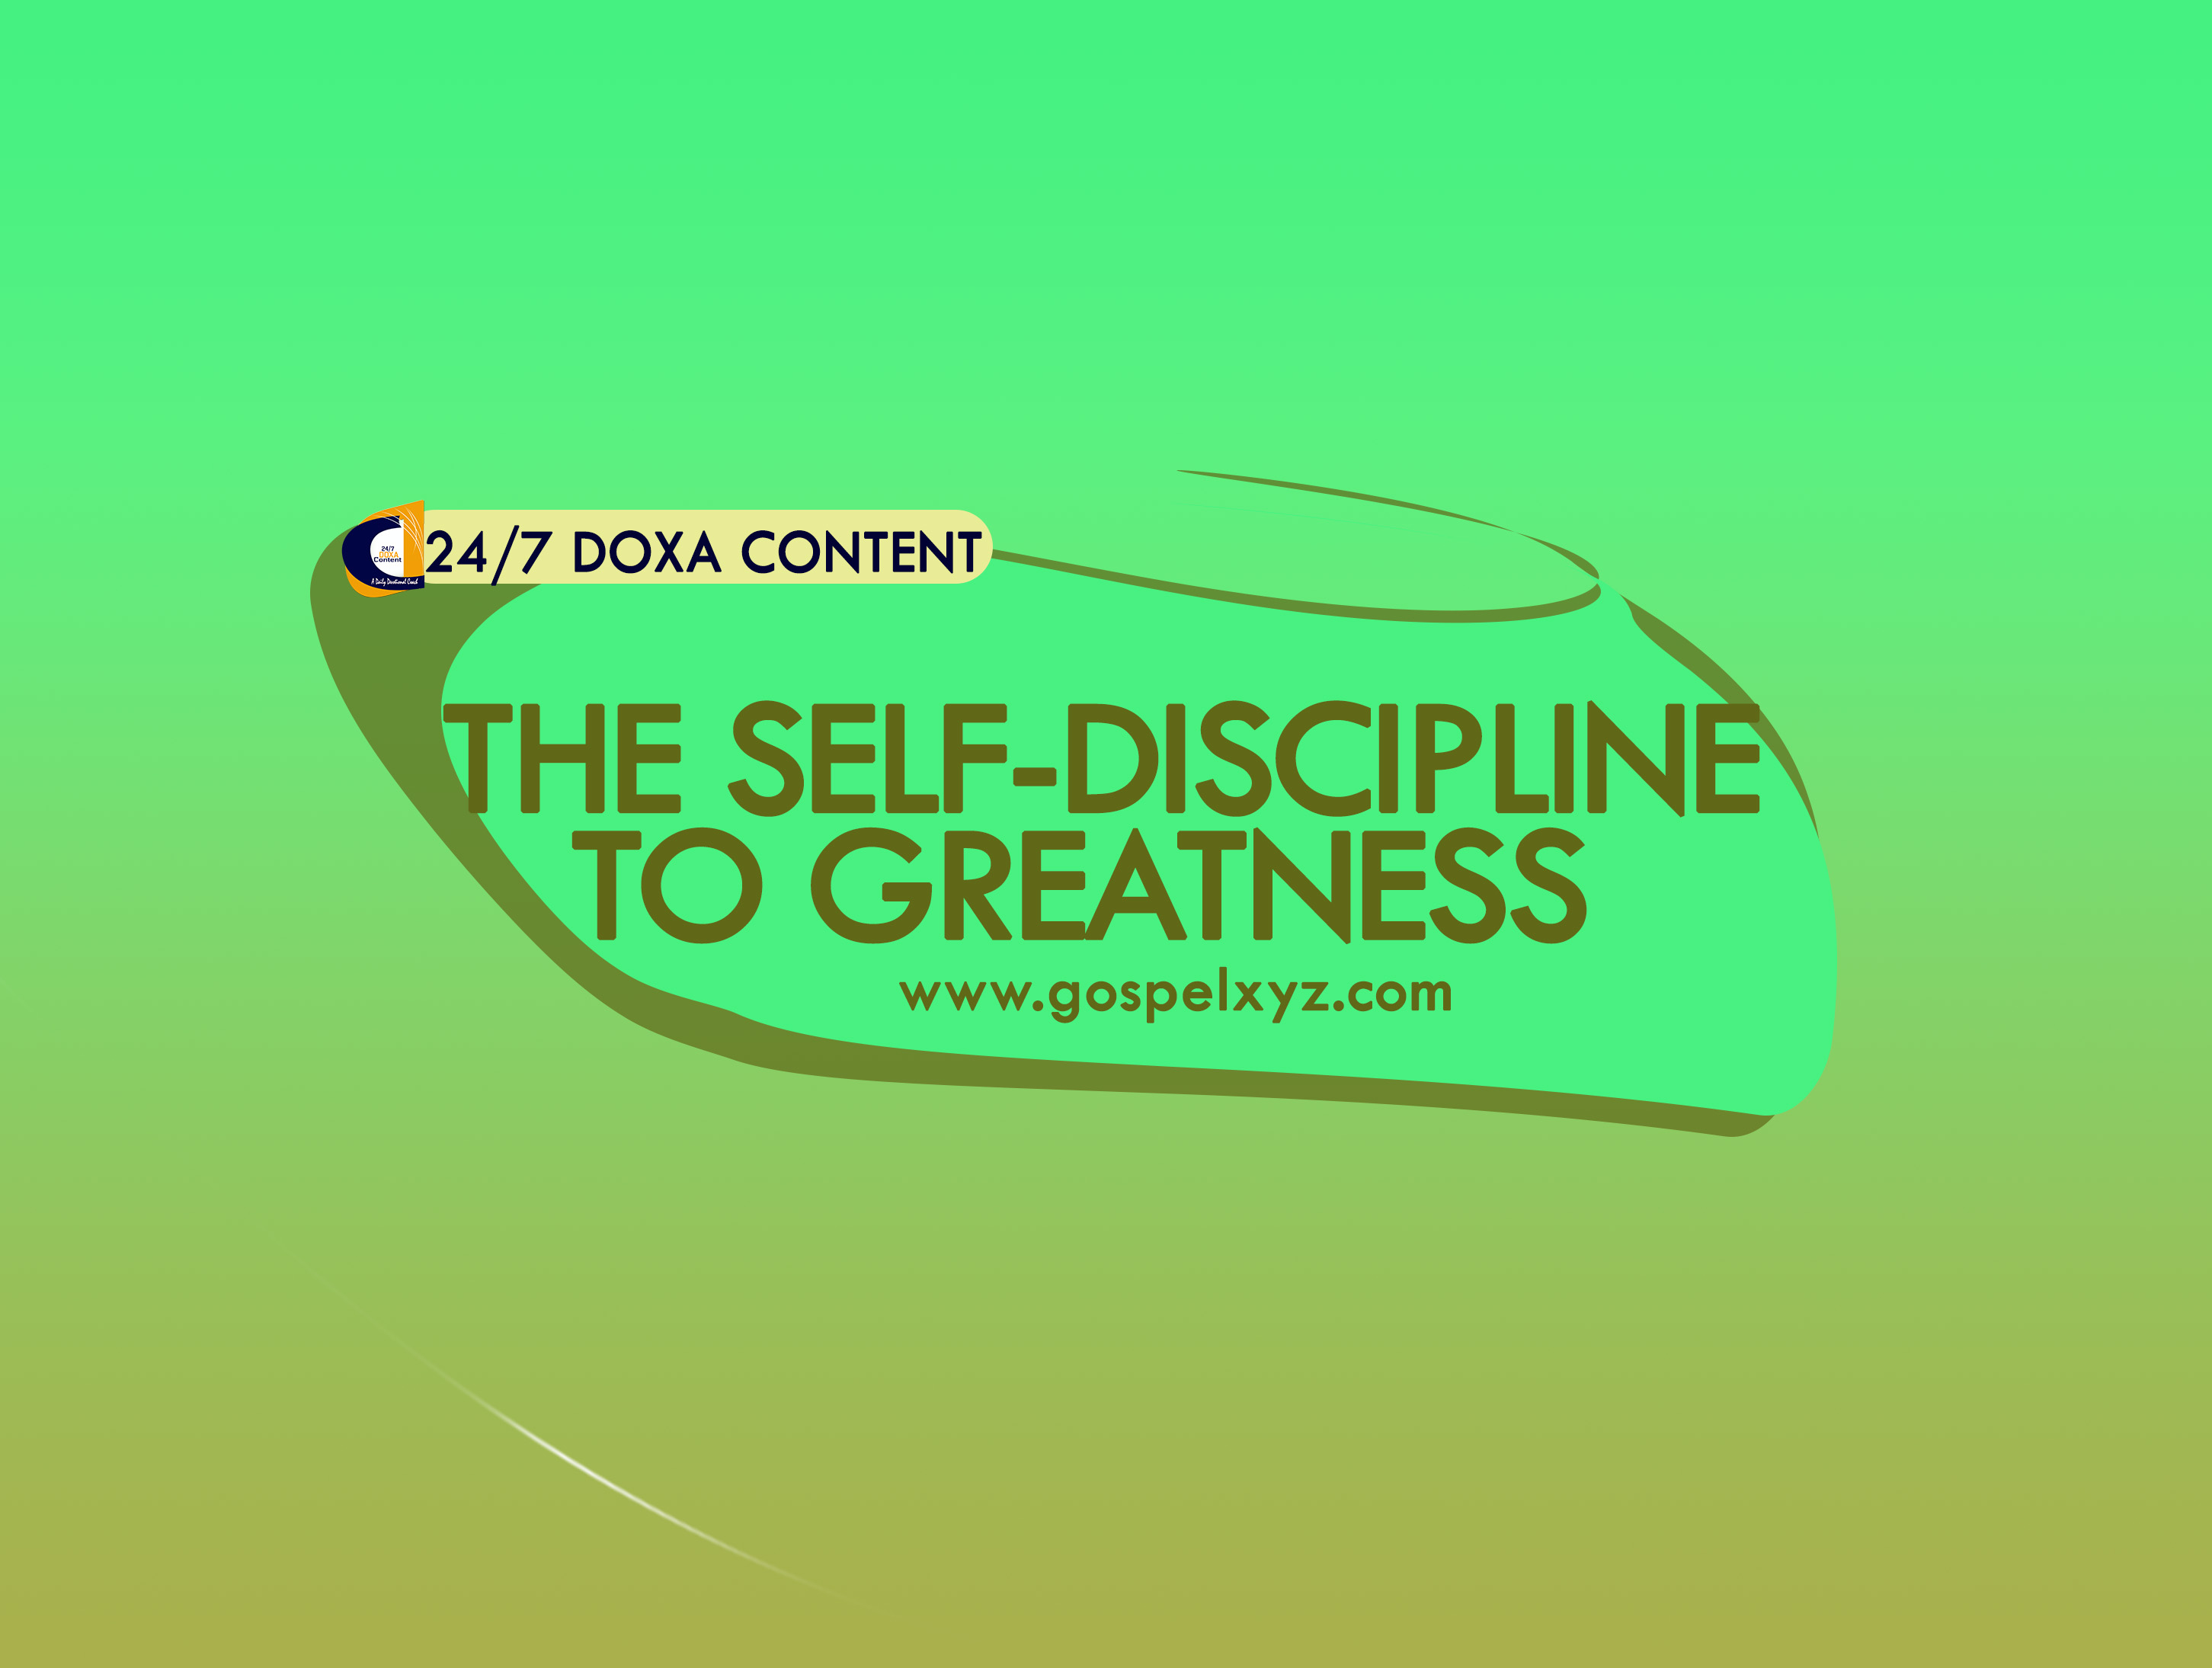 24/7 DOXA Content 2019 FRIDAY, 21st June-THE SELF-DISCIPLINE TO GREATNESS